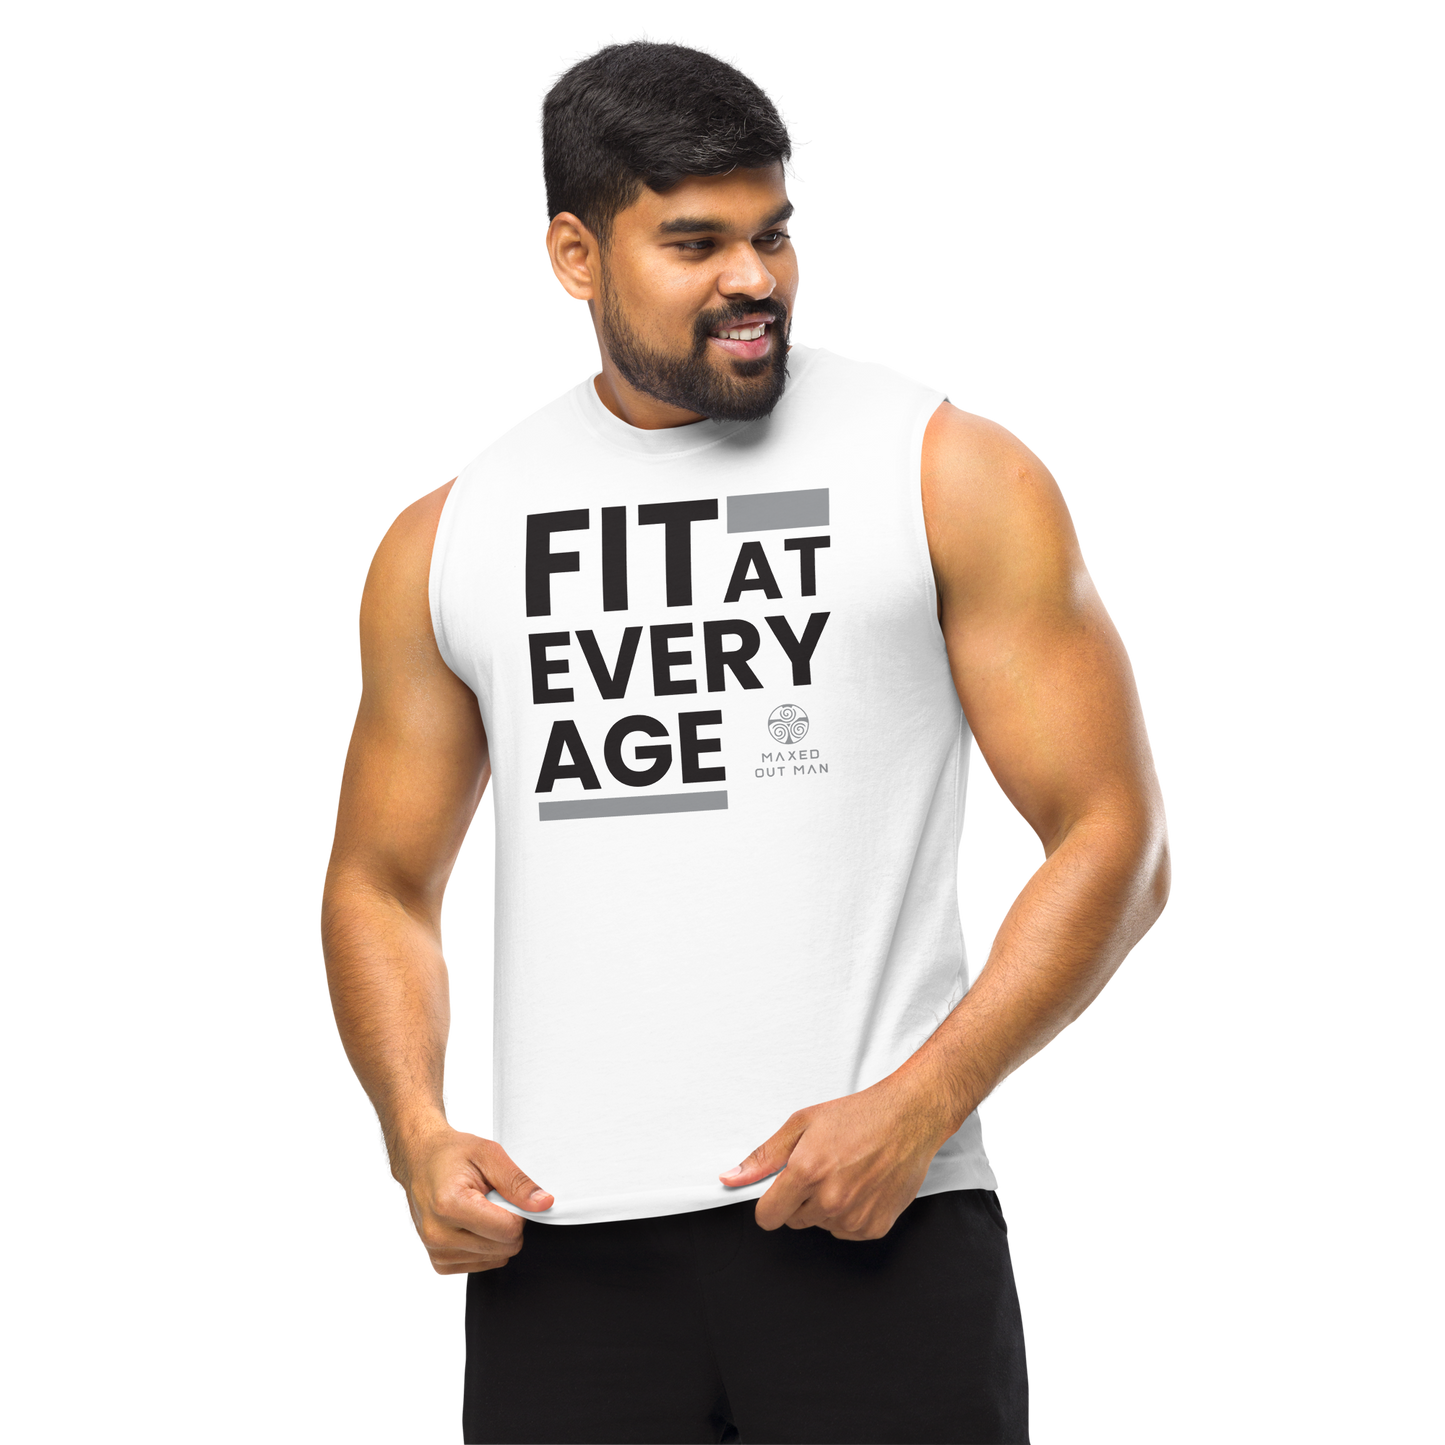 Fit at Every Age Muscle Shirt - Lighter Colors